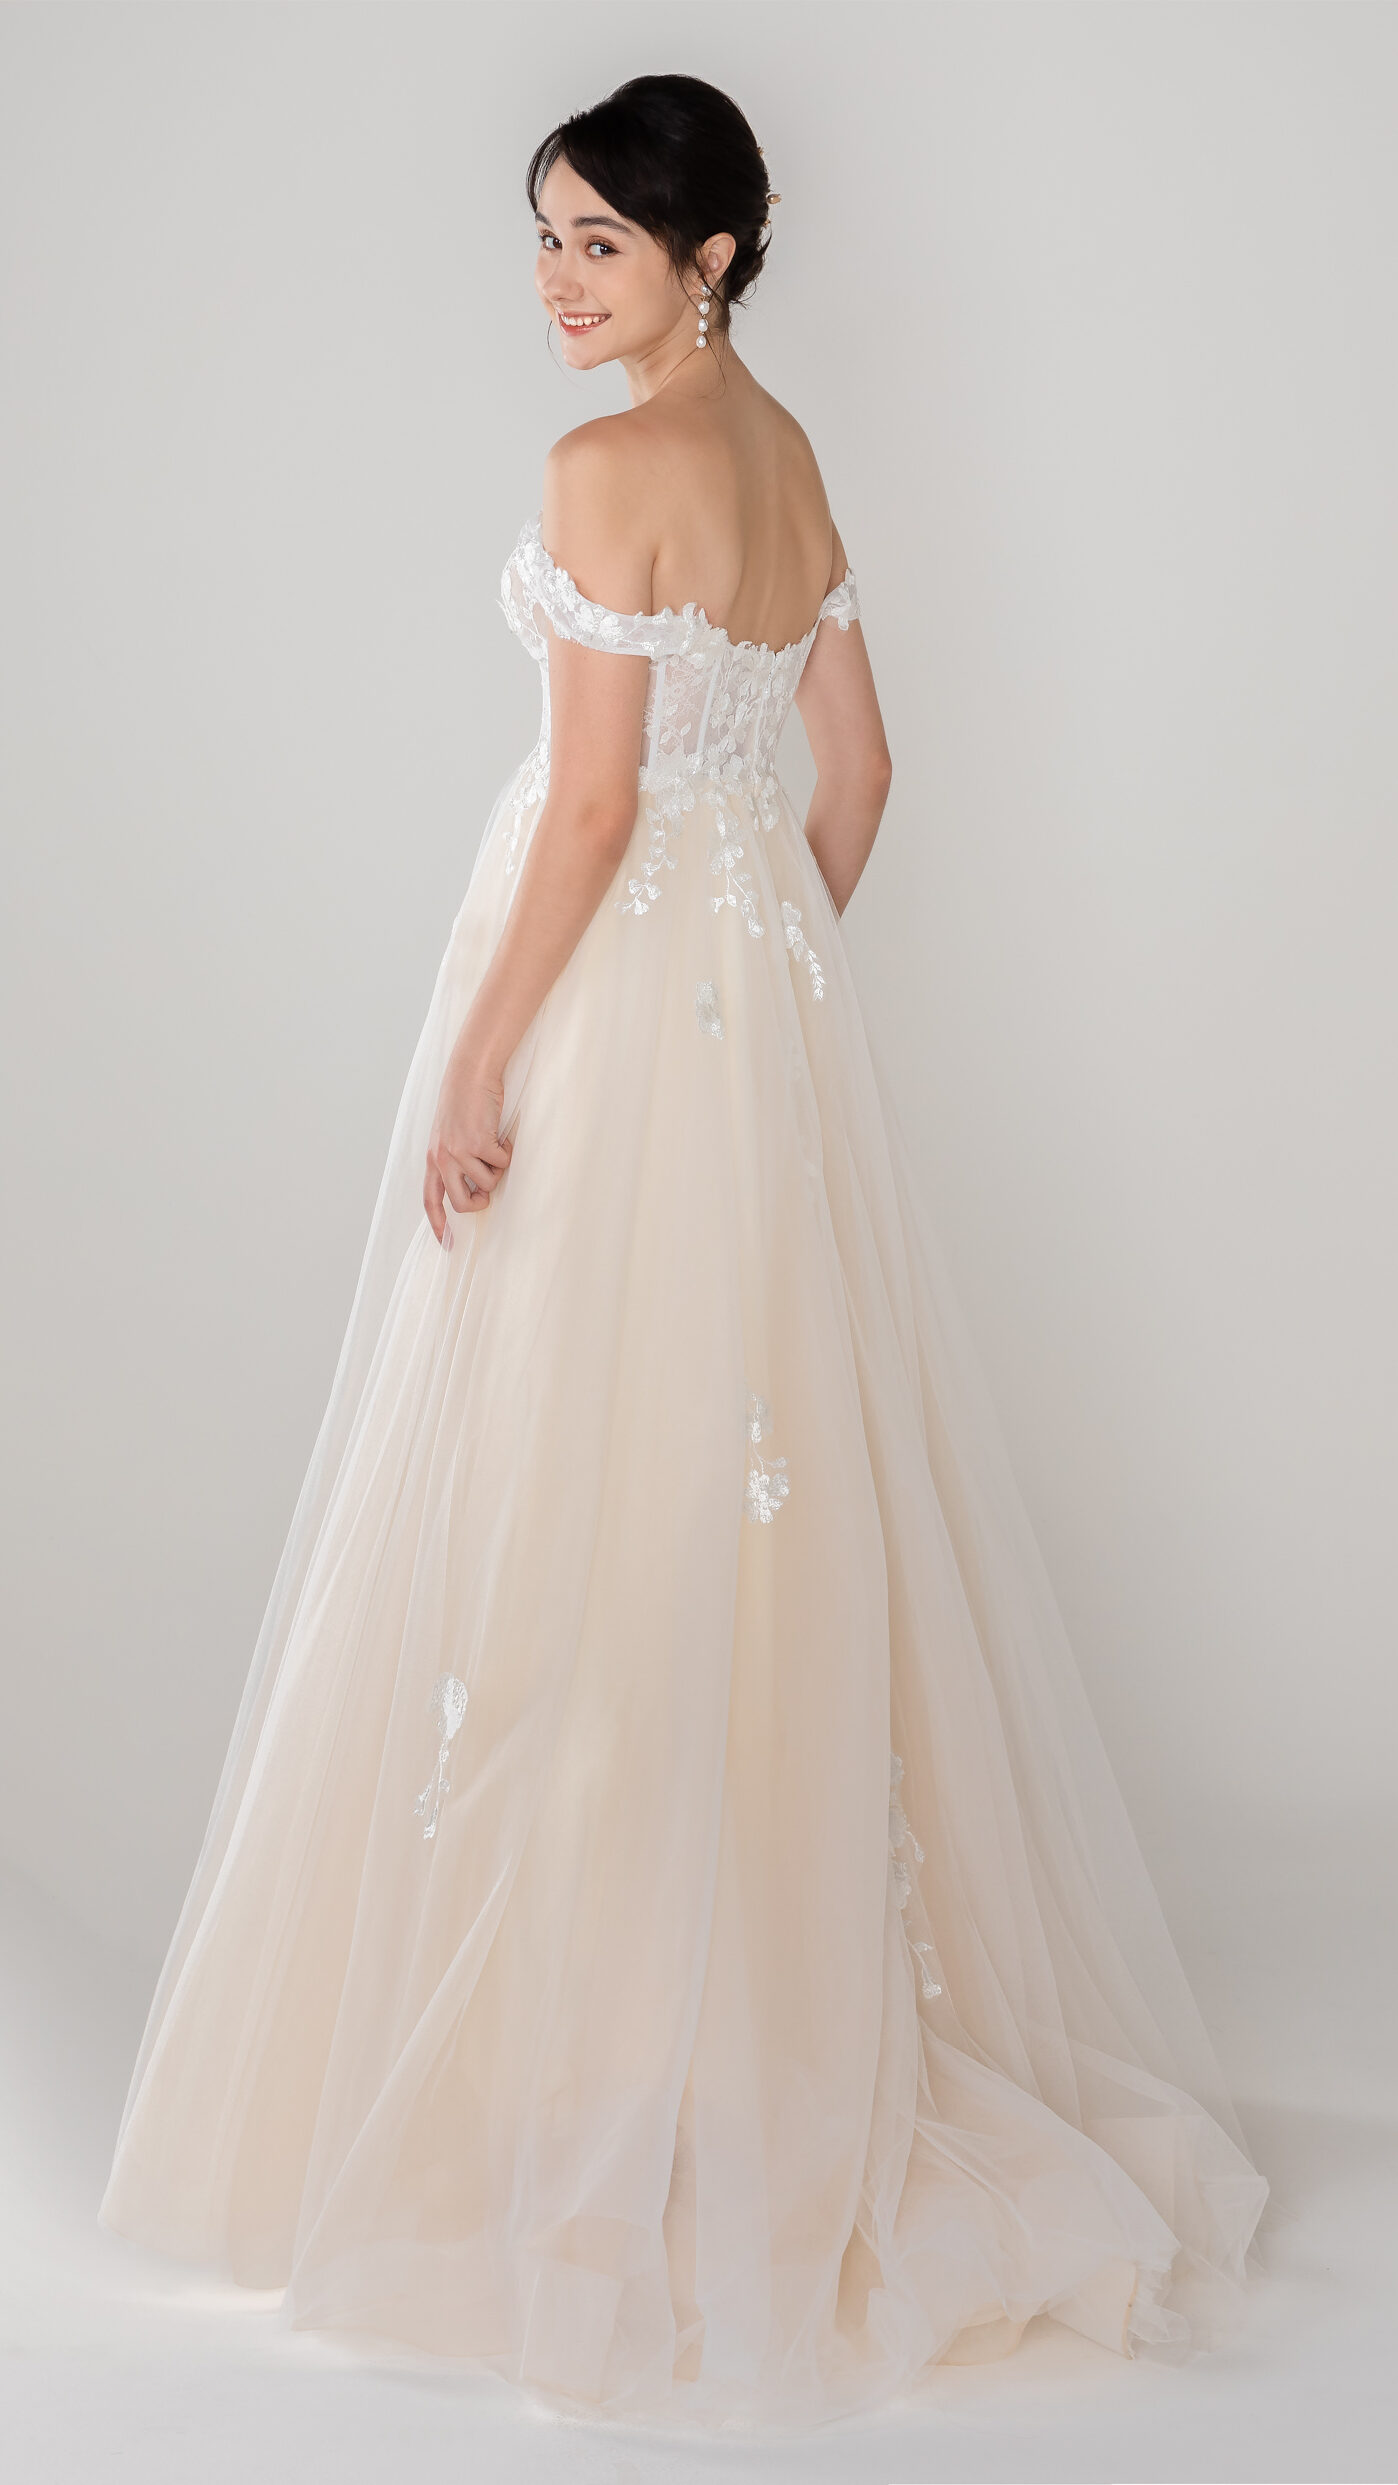 Romantic Wedding Dresses by Cocomelody - CW2536 | ANIKA